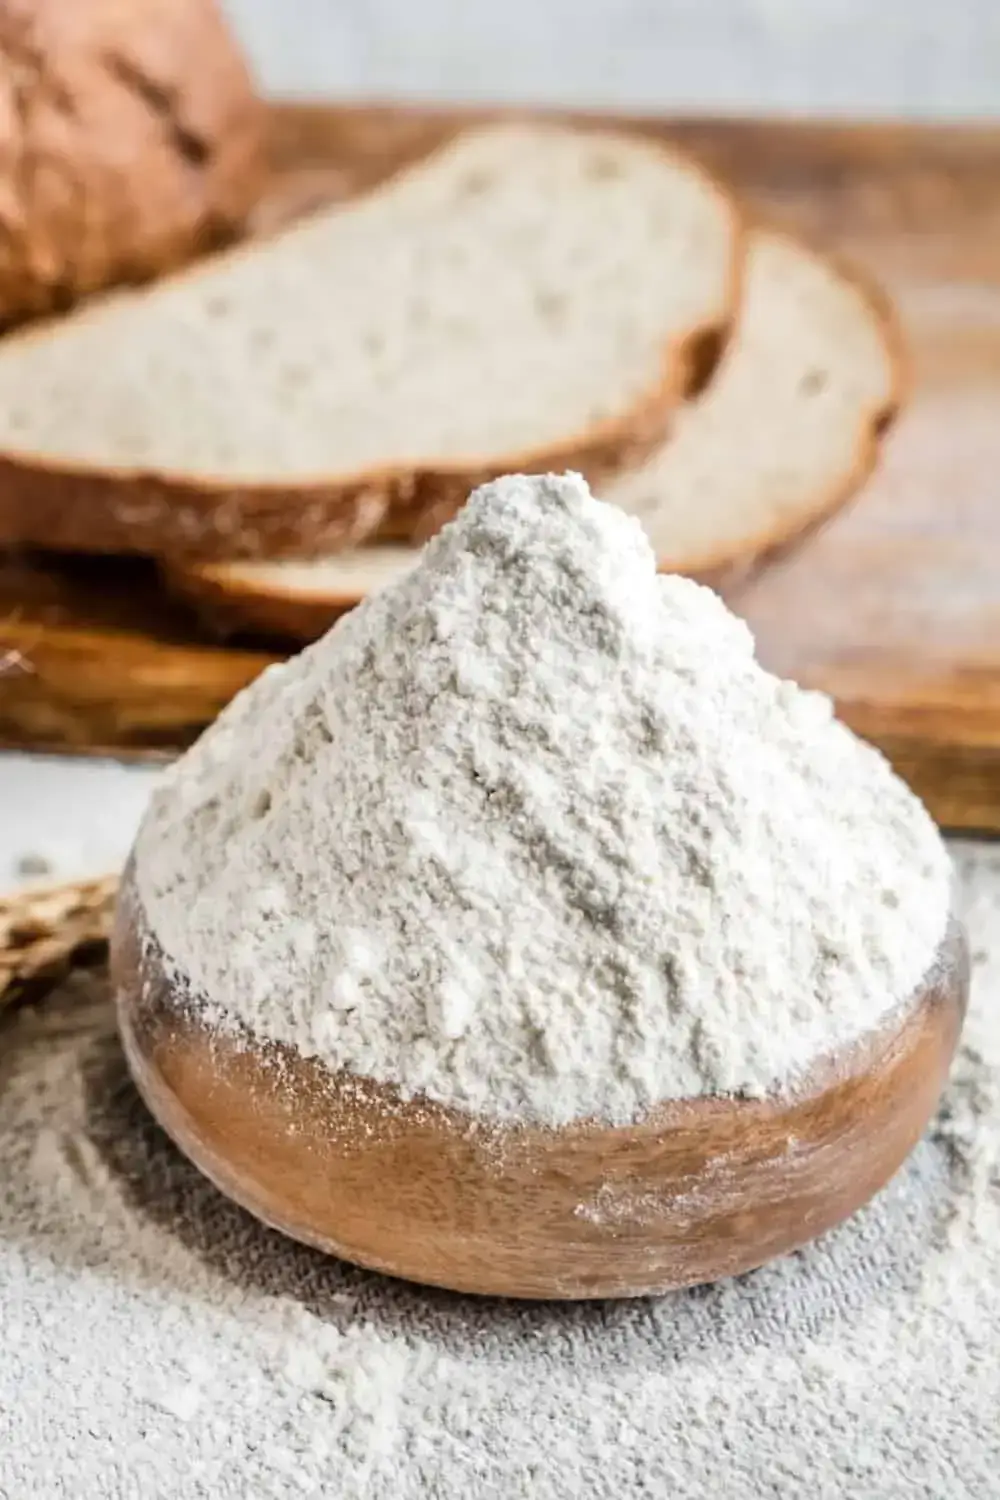 How to Tell If Flour Has Gone Bad